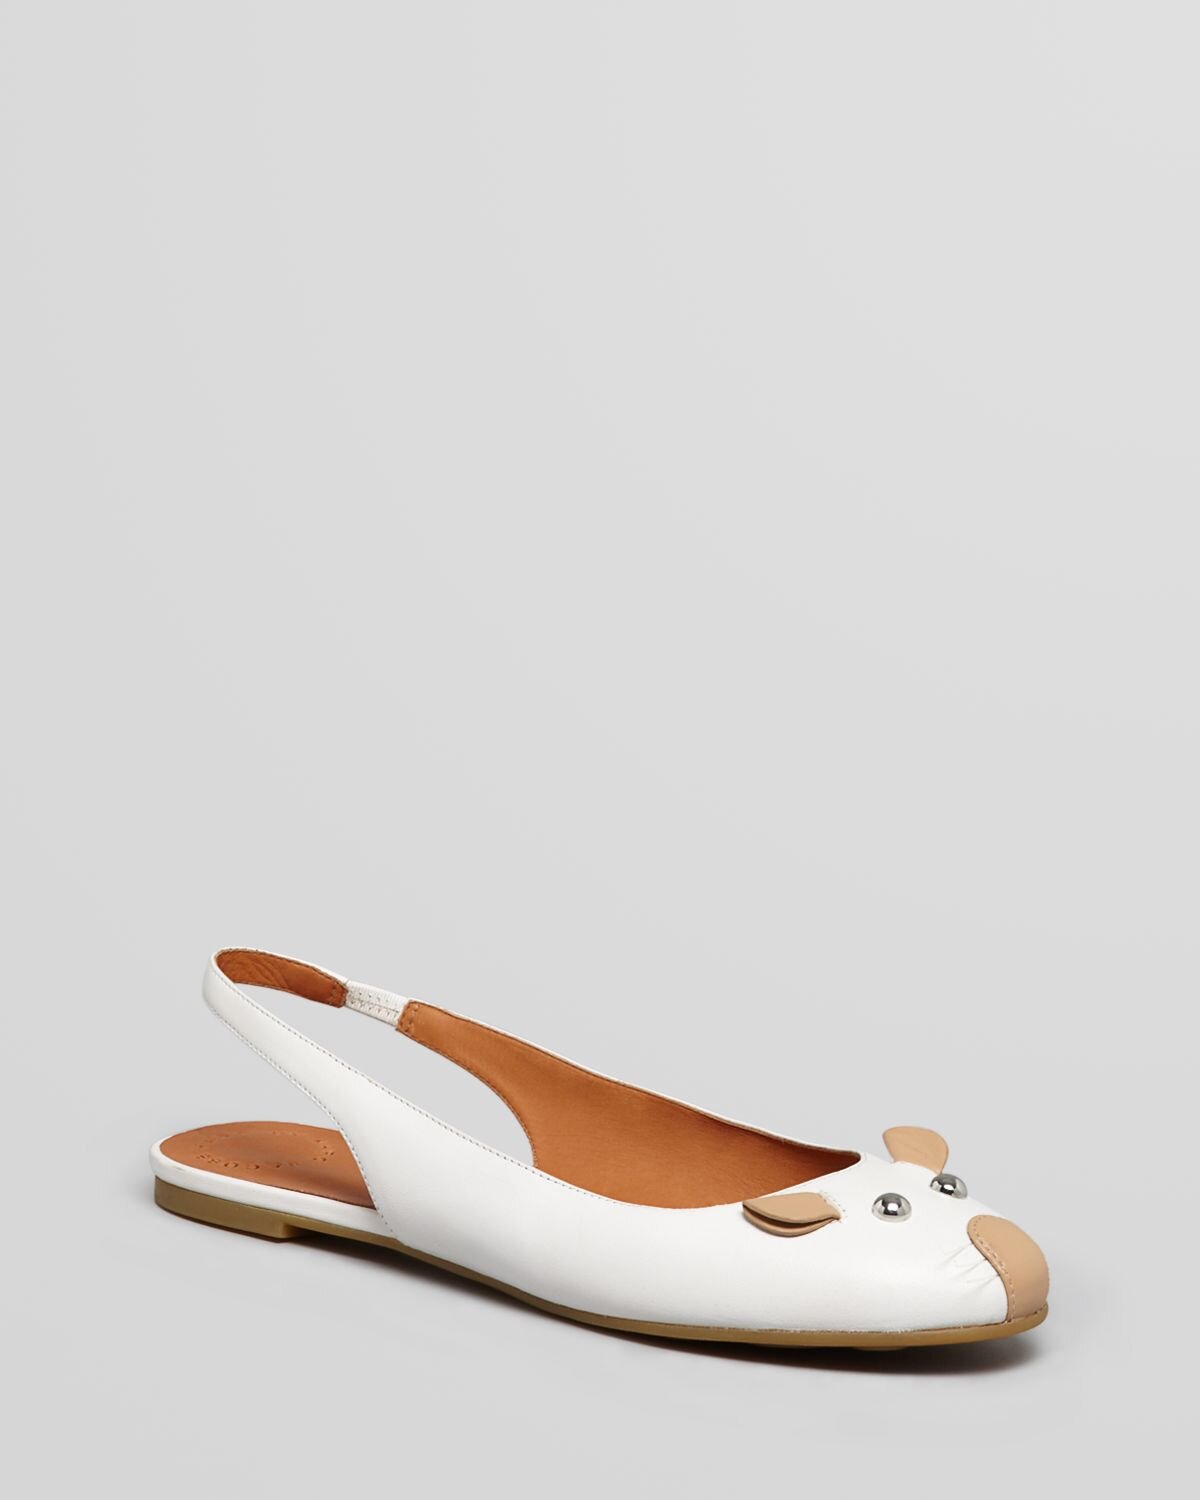 Marc By Marc Jacobs Mouse Slingback Flats in White.jpg